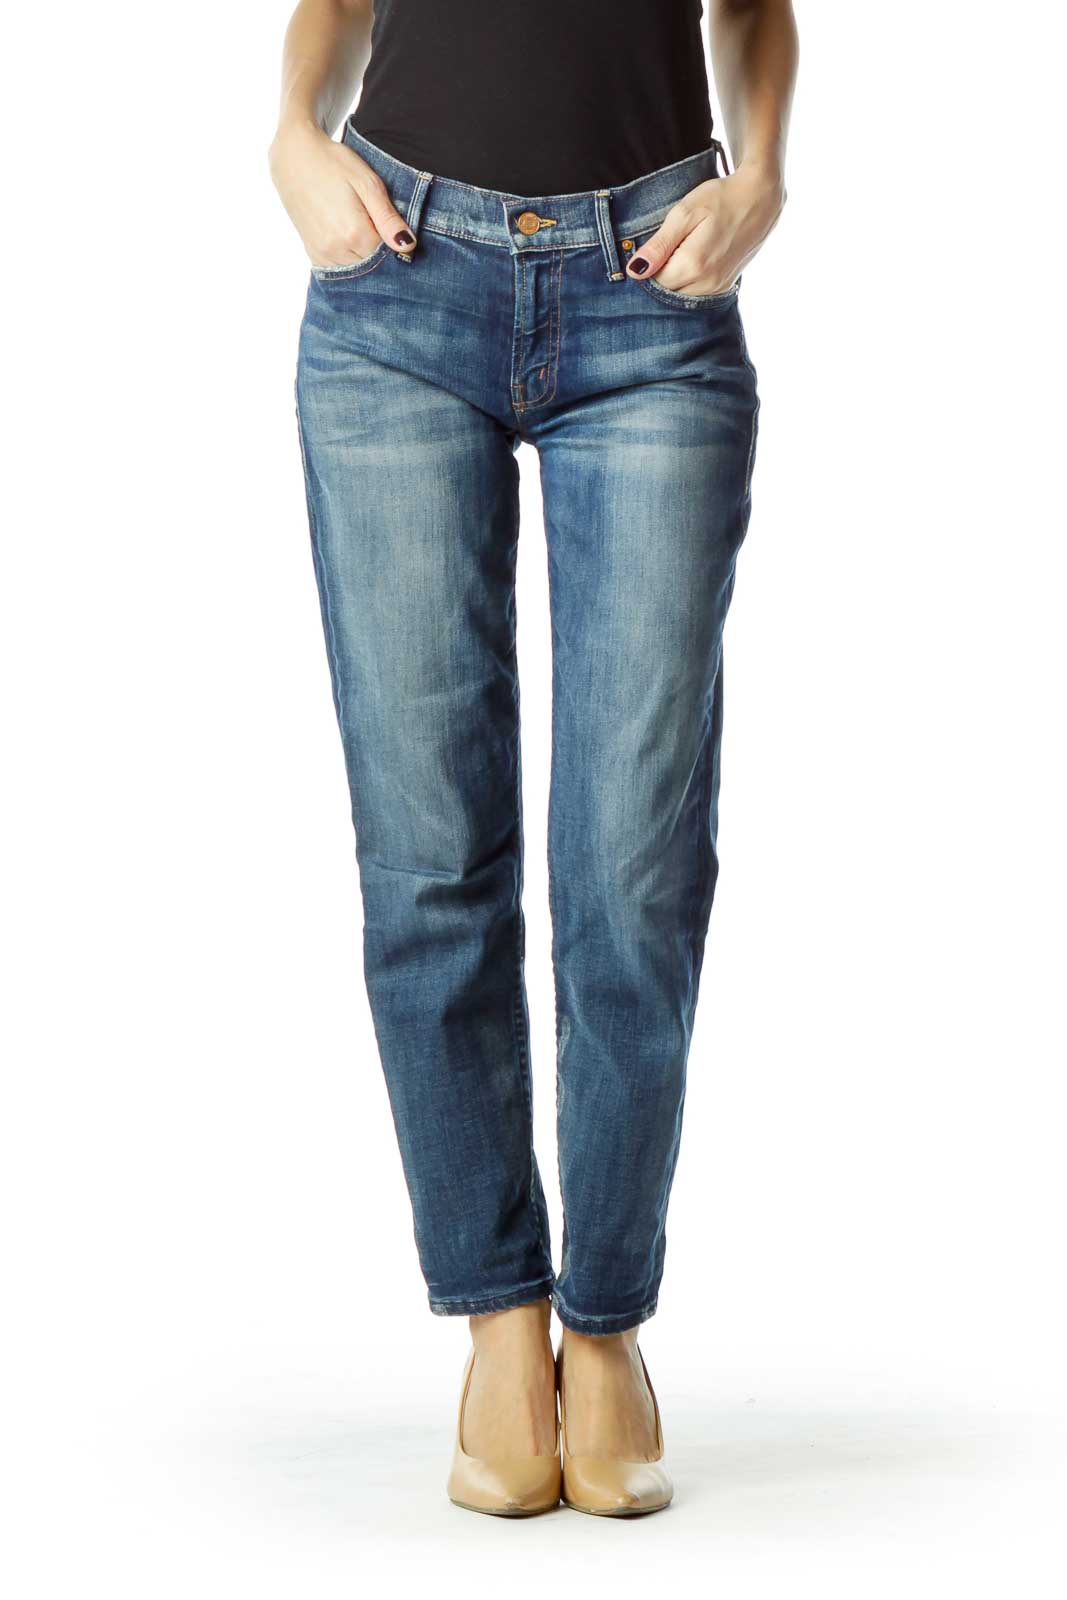 Straight Leg Jean with Distressed Pockets Front